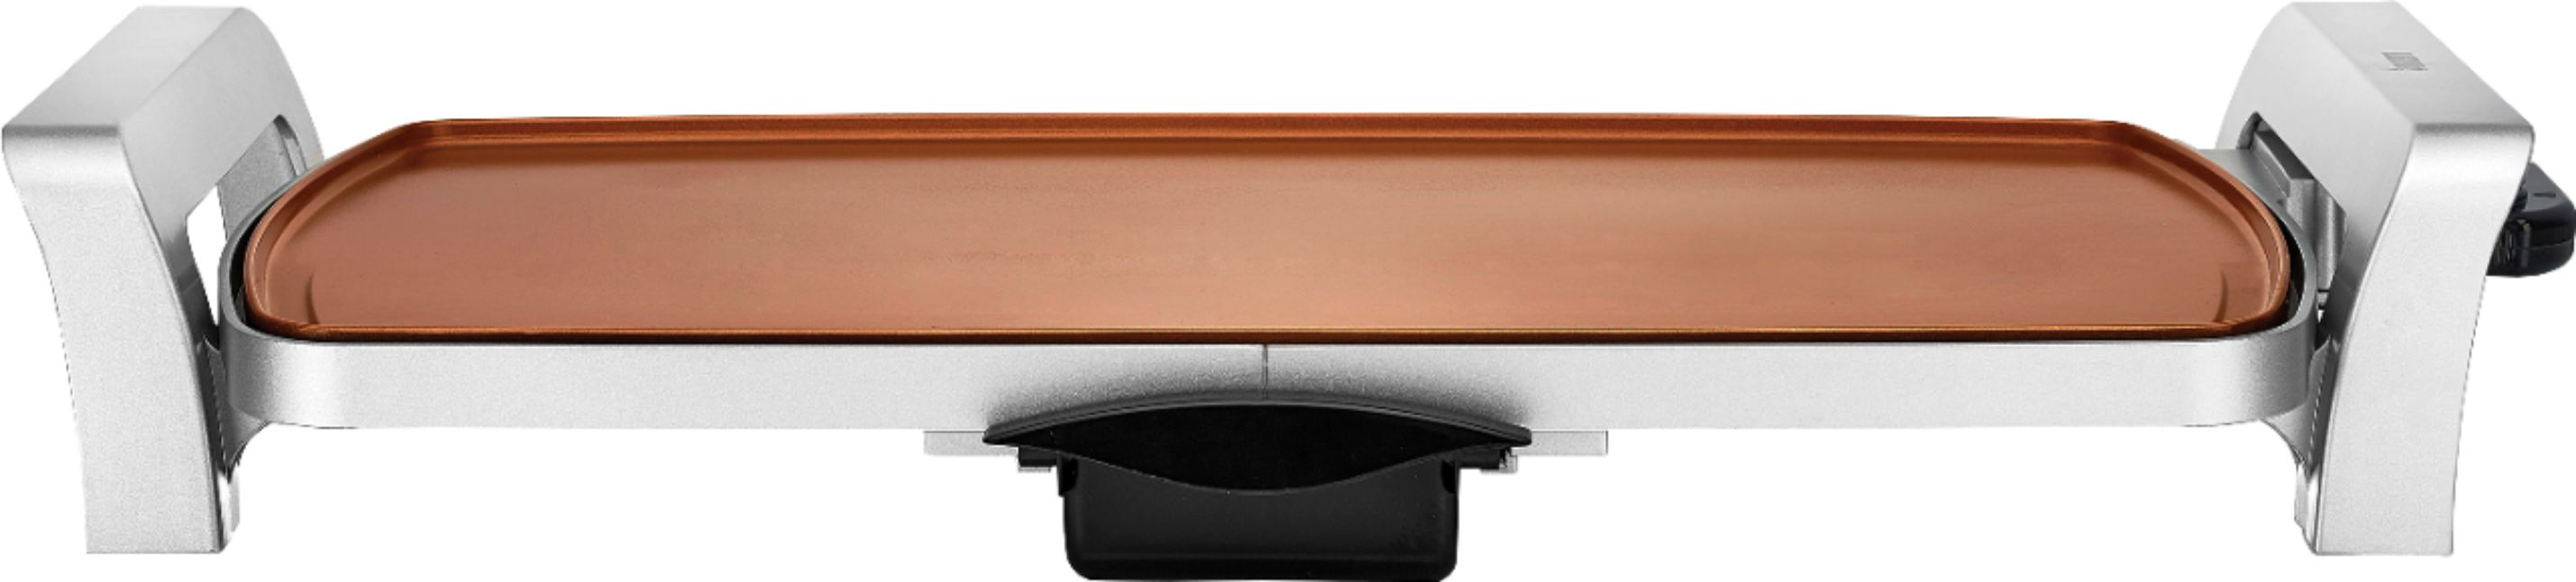 Bialetti Titan Extra Large Griddle Copper ZZZ35023 - Best Buy